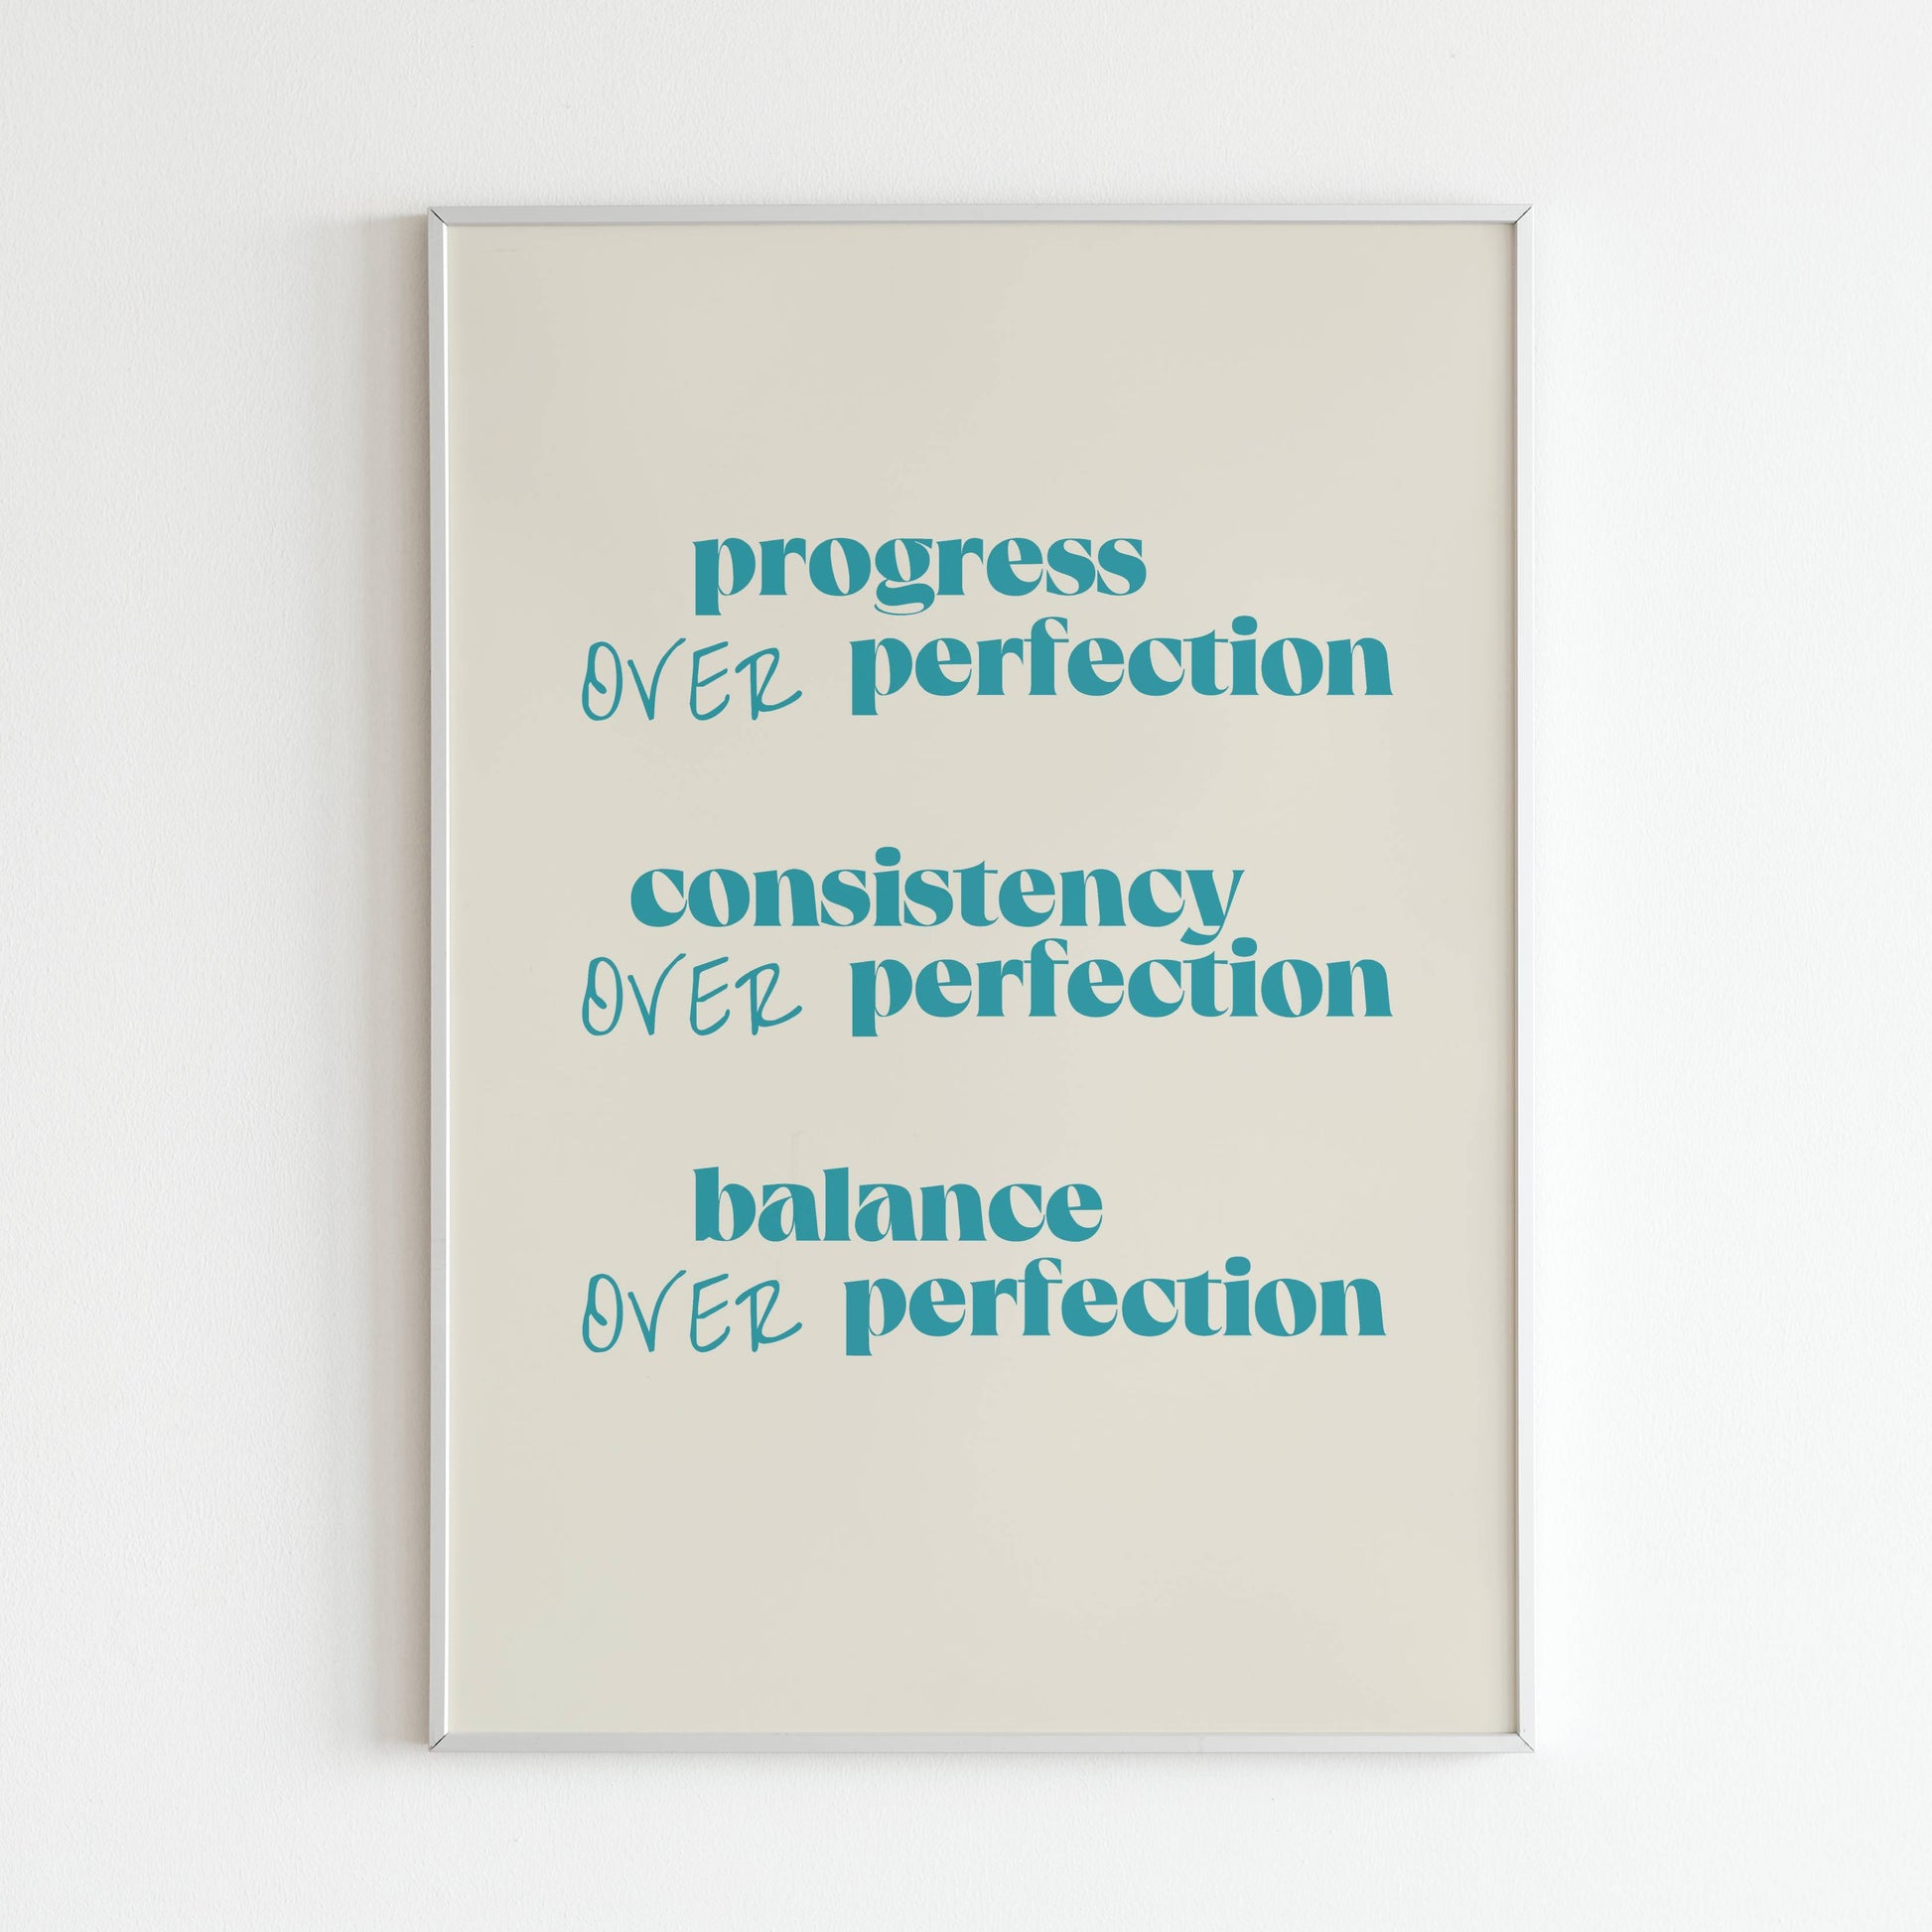 Downloadable typography wall art promoting a balanced approach to goals